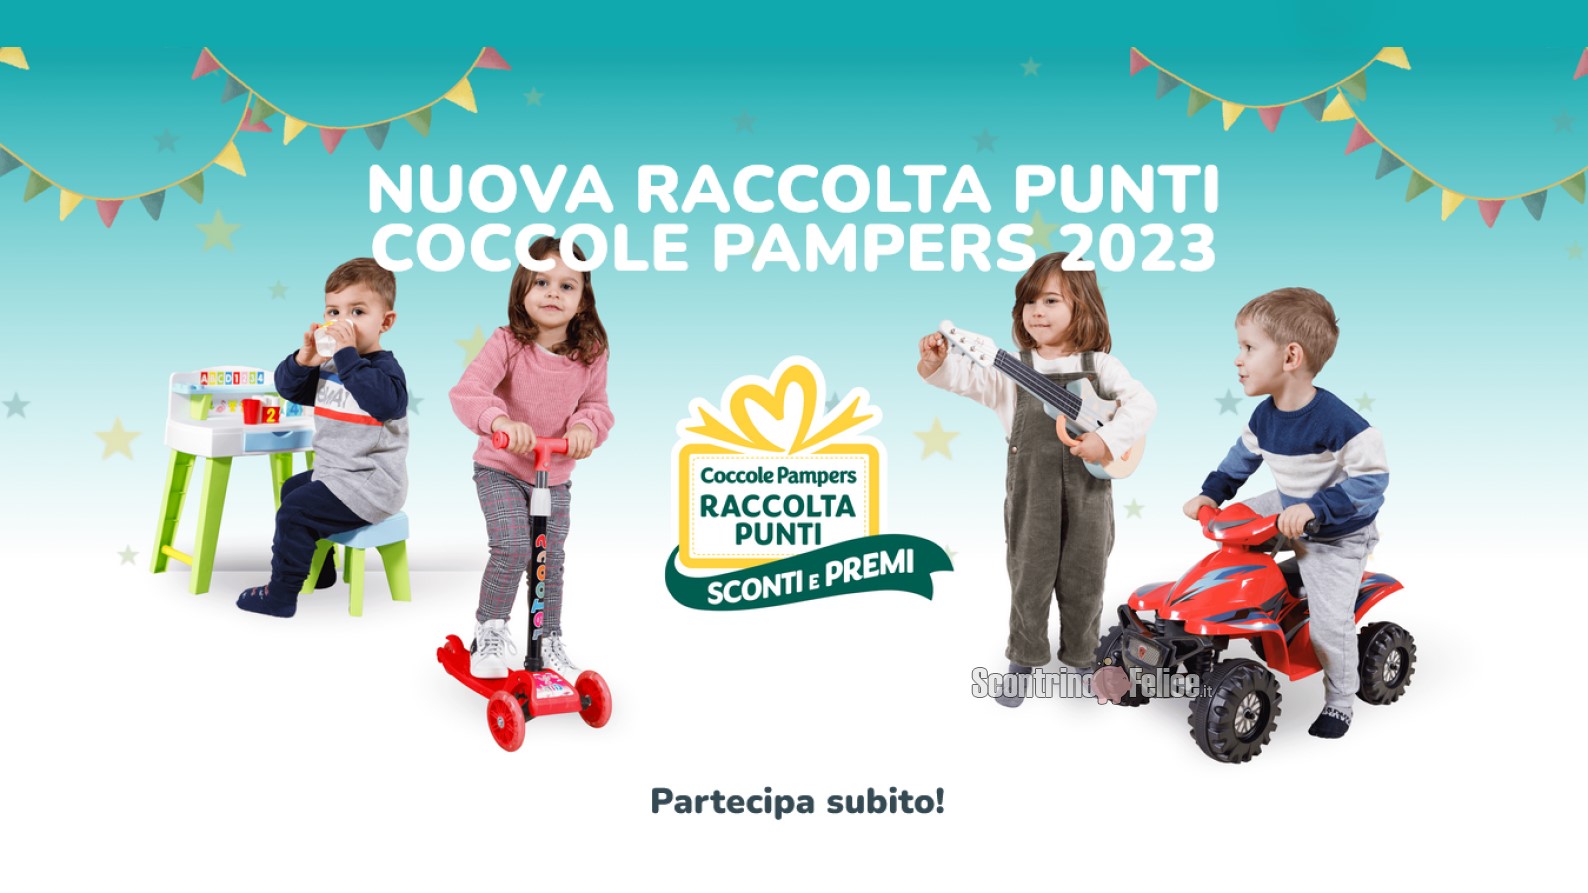 Raccolta punti Coccole Pampers 4.0 2023